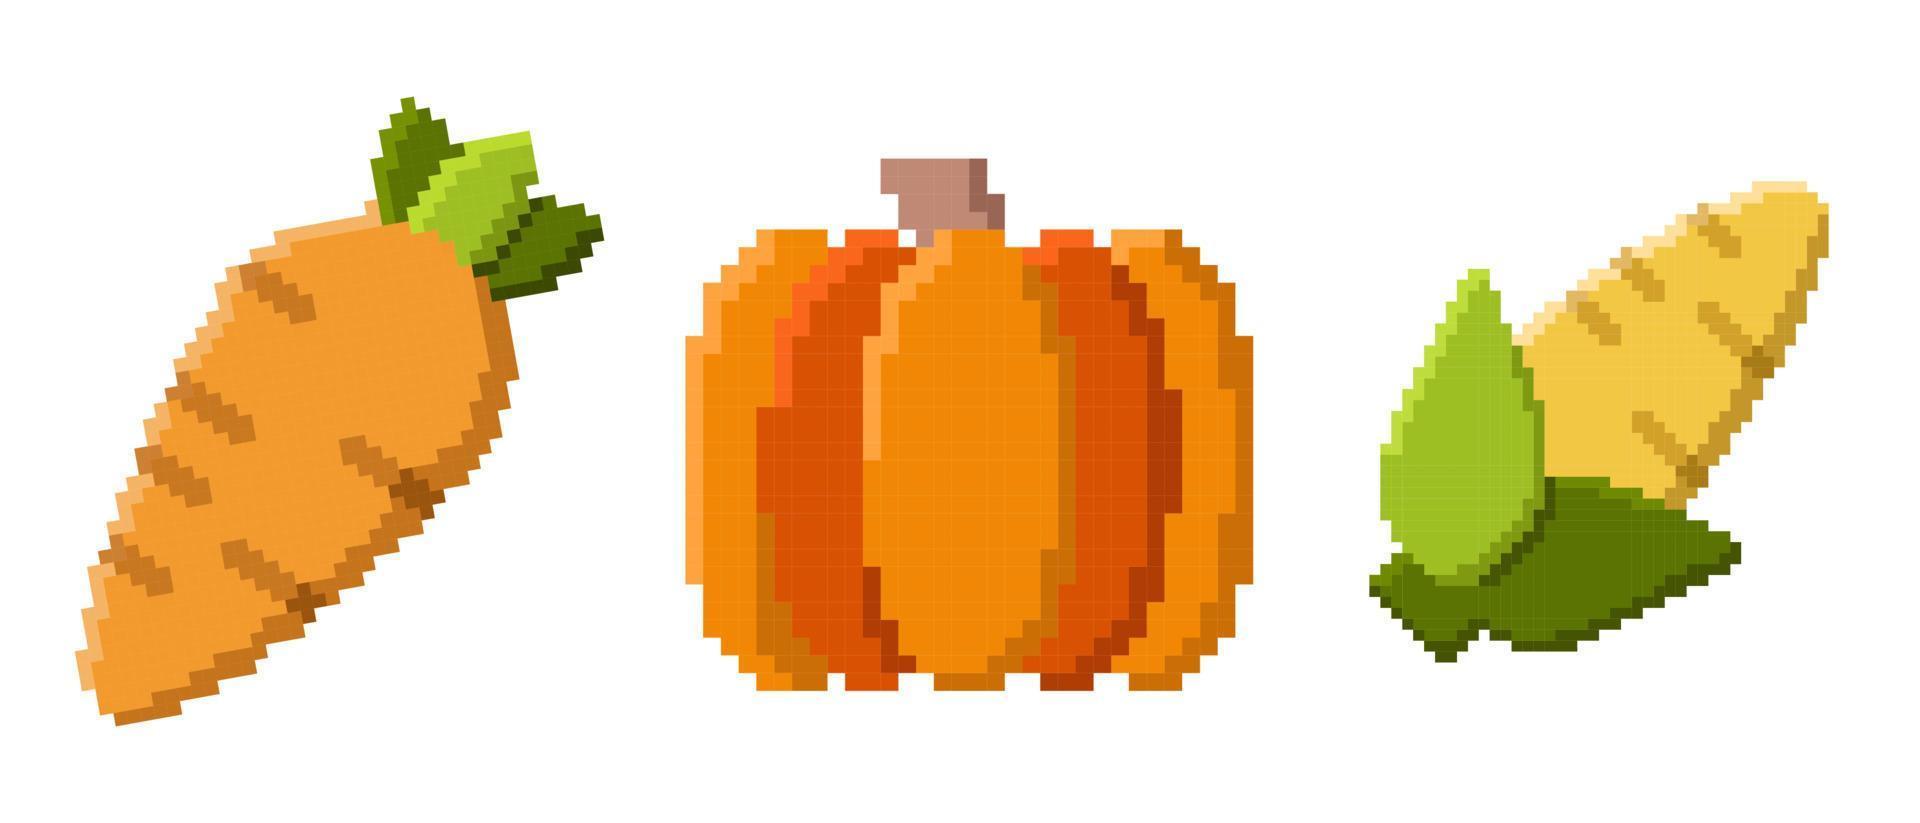 Pixel art icon. Pixel art vegetables icon. Cute pixel vegetables. 8 bit pixel vegetables. Old school computer graphic style. Vector illustration